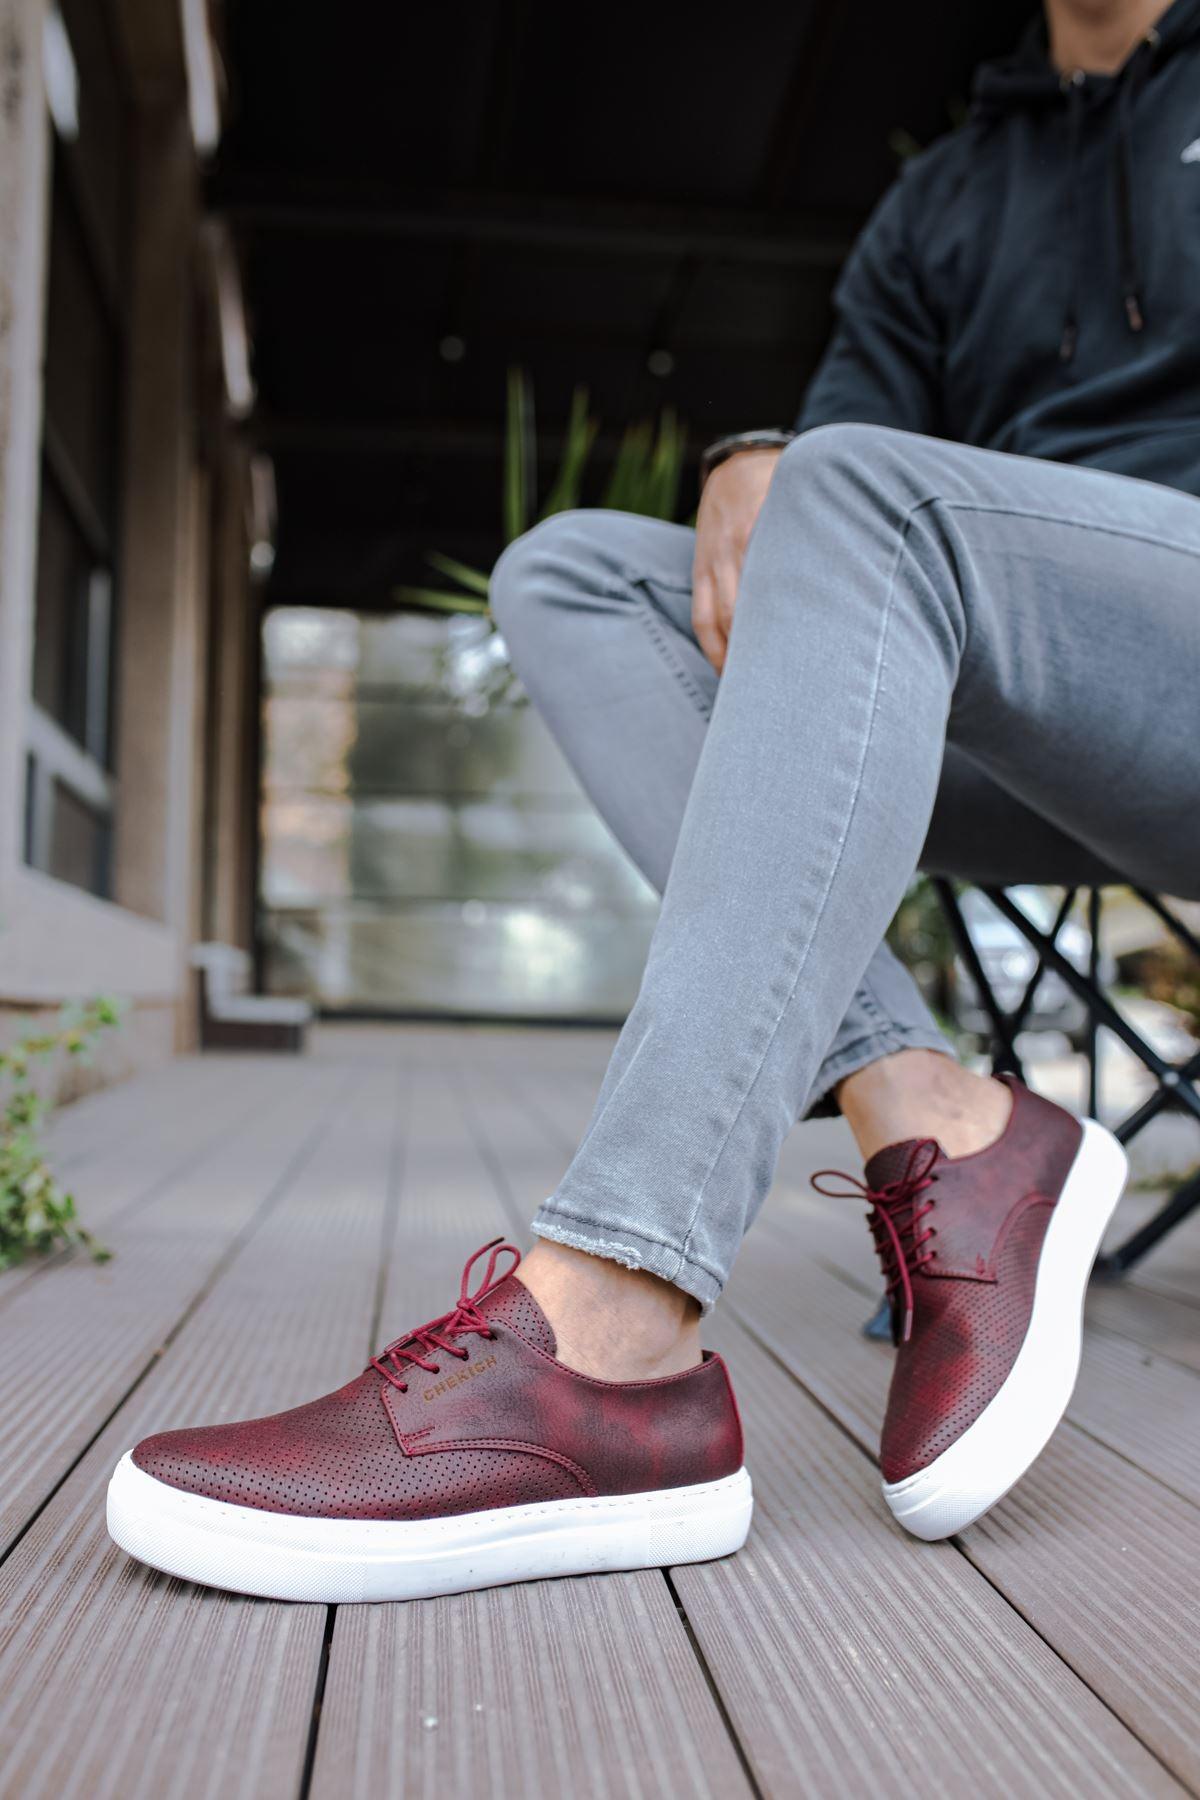 CH061 Men's Orthopedics Burgundy-White Sole Lace-up Casual Sneaker Shoes - STREET MODE ™